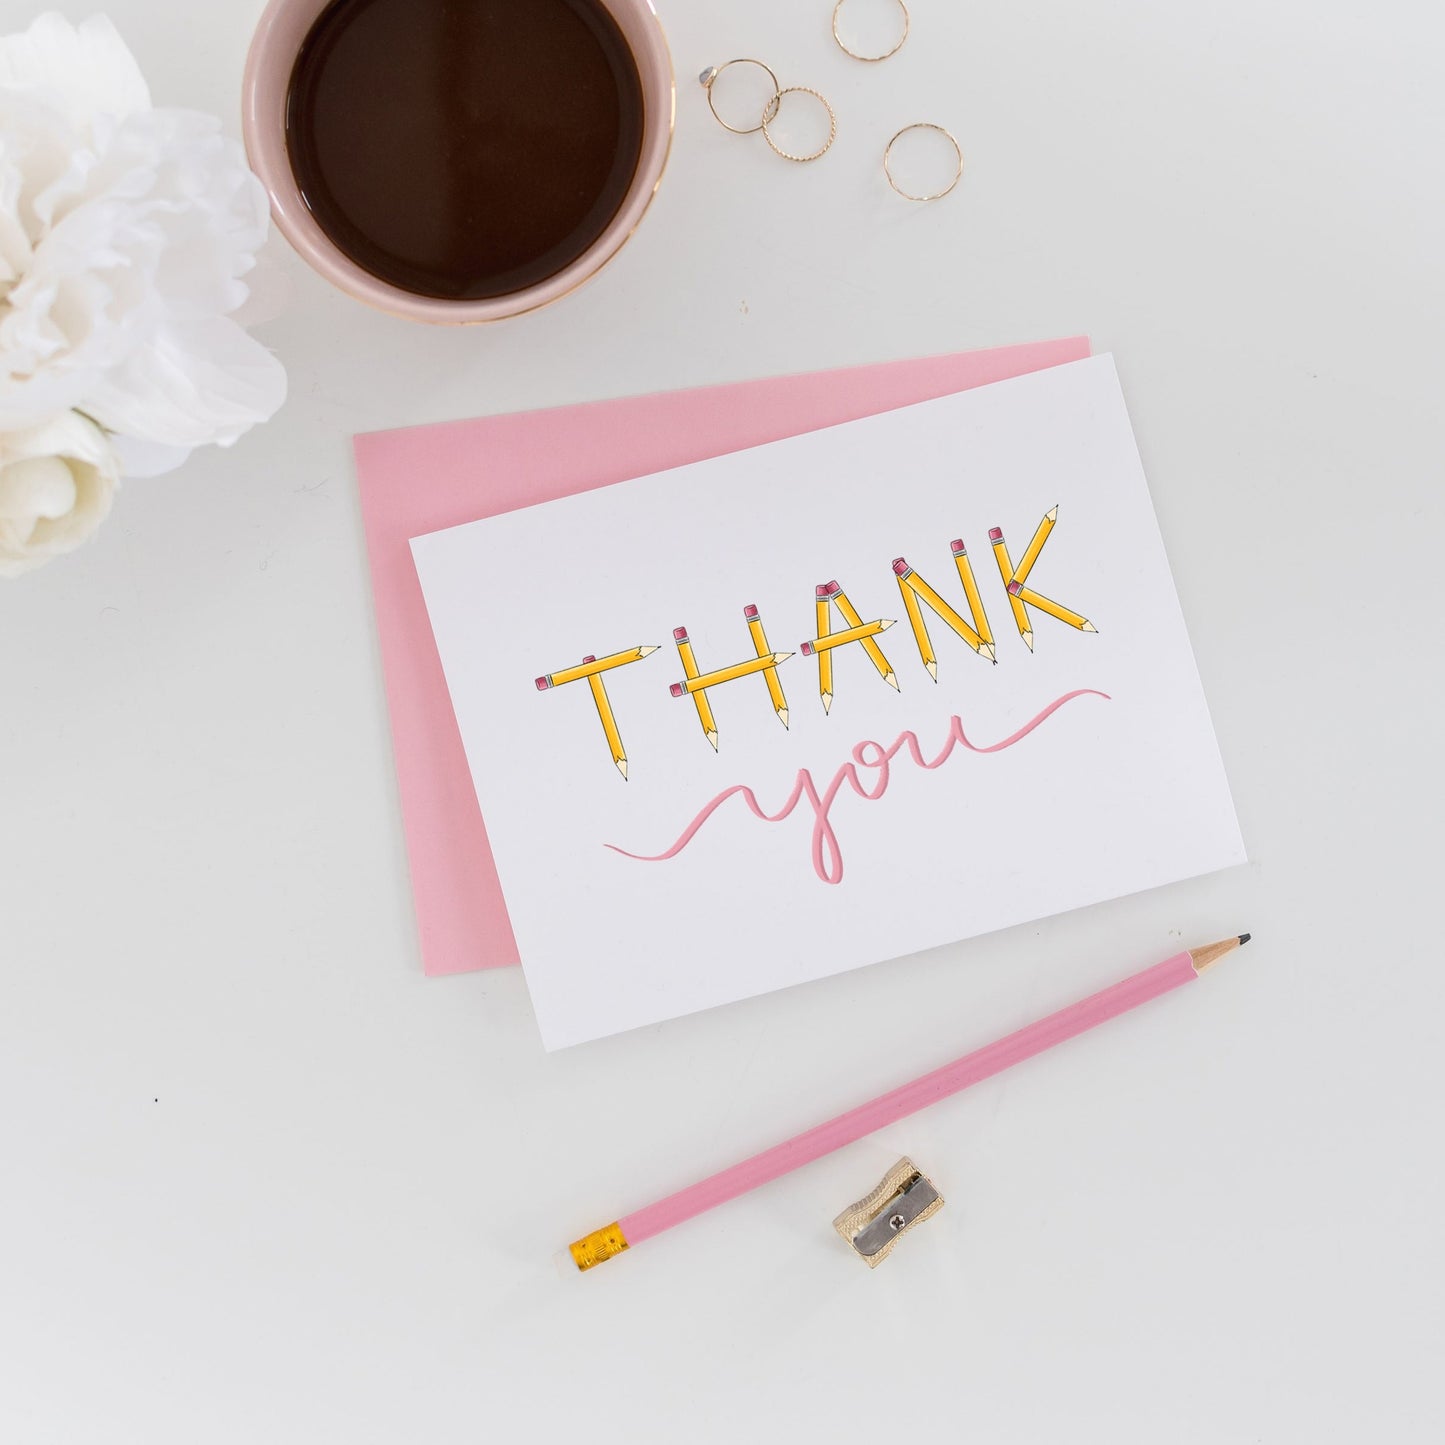 Pencil Thank You Greeting Card